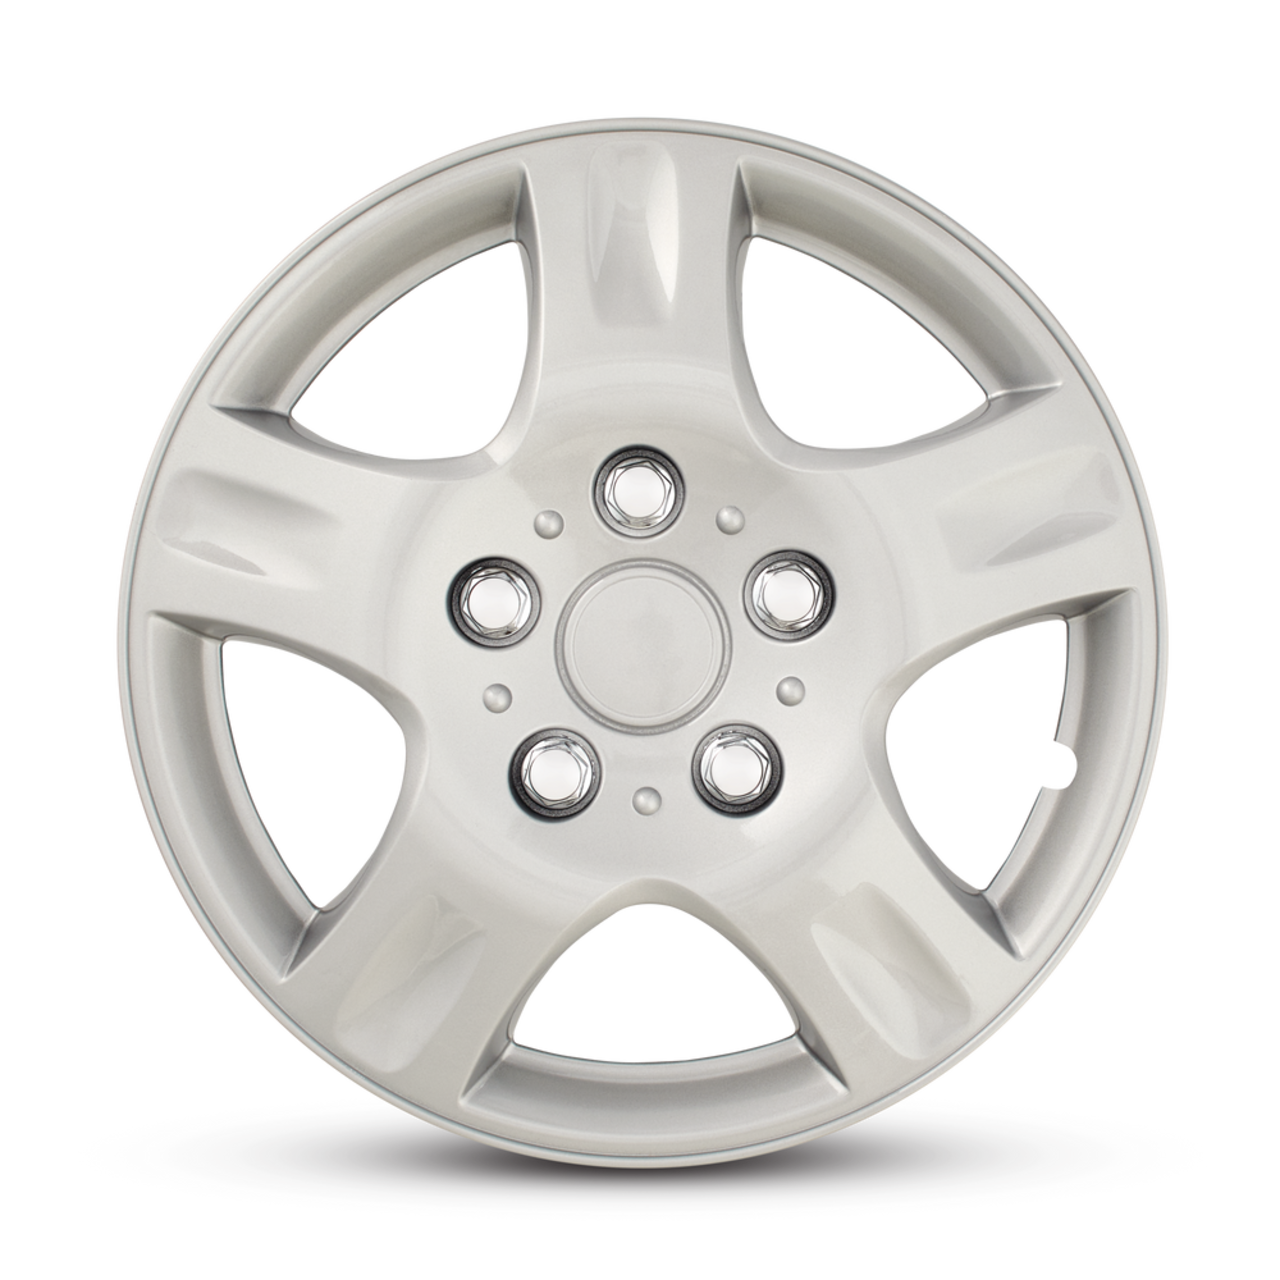 https://media-www.canadiantire.ca/product/automotive/tires/wheels-and-accessories/2415661/autotrends-14-80116-14-silver-4pk-wheel-cover-2d464c9d-5587-4aae-bfdc-28dffdb0bbbd.png?imdensity=1&imwidth=640&impolicy=mZoom